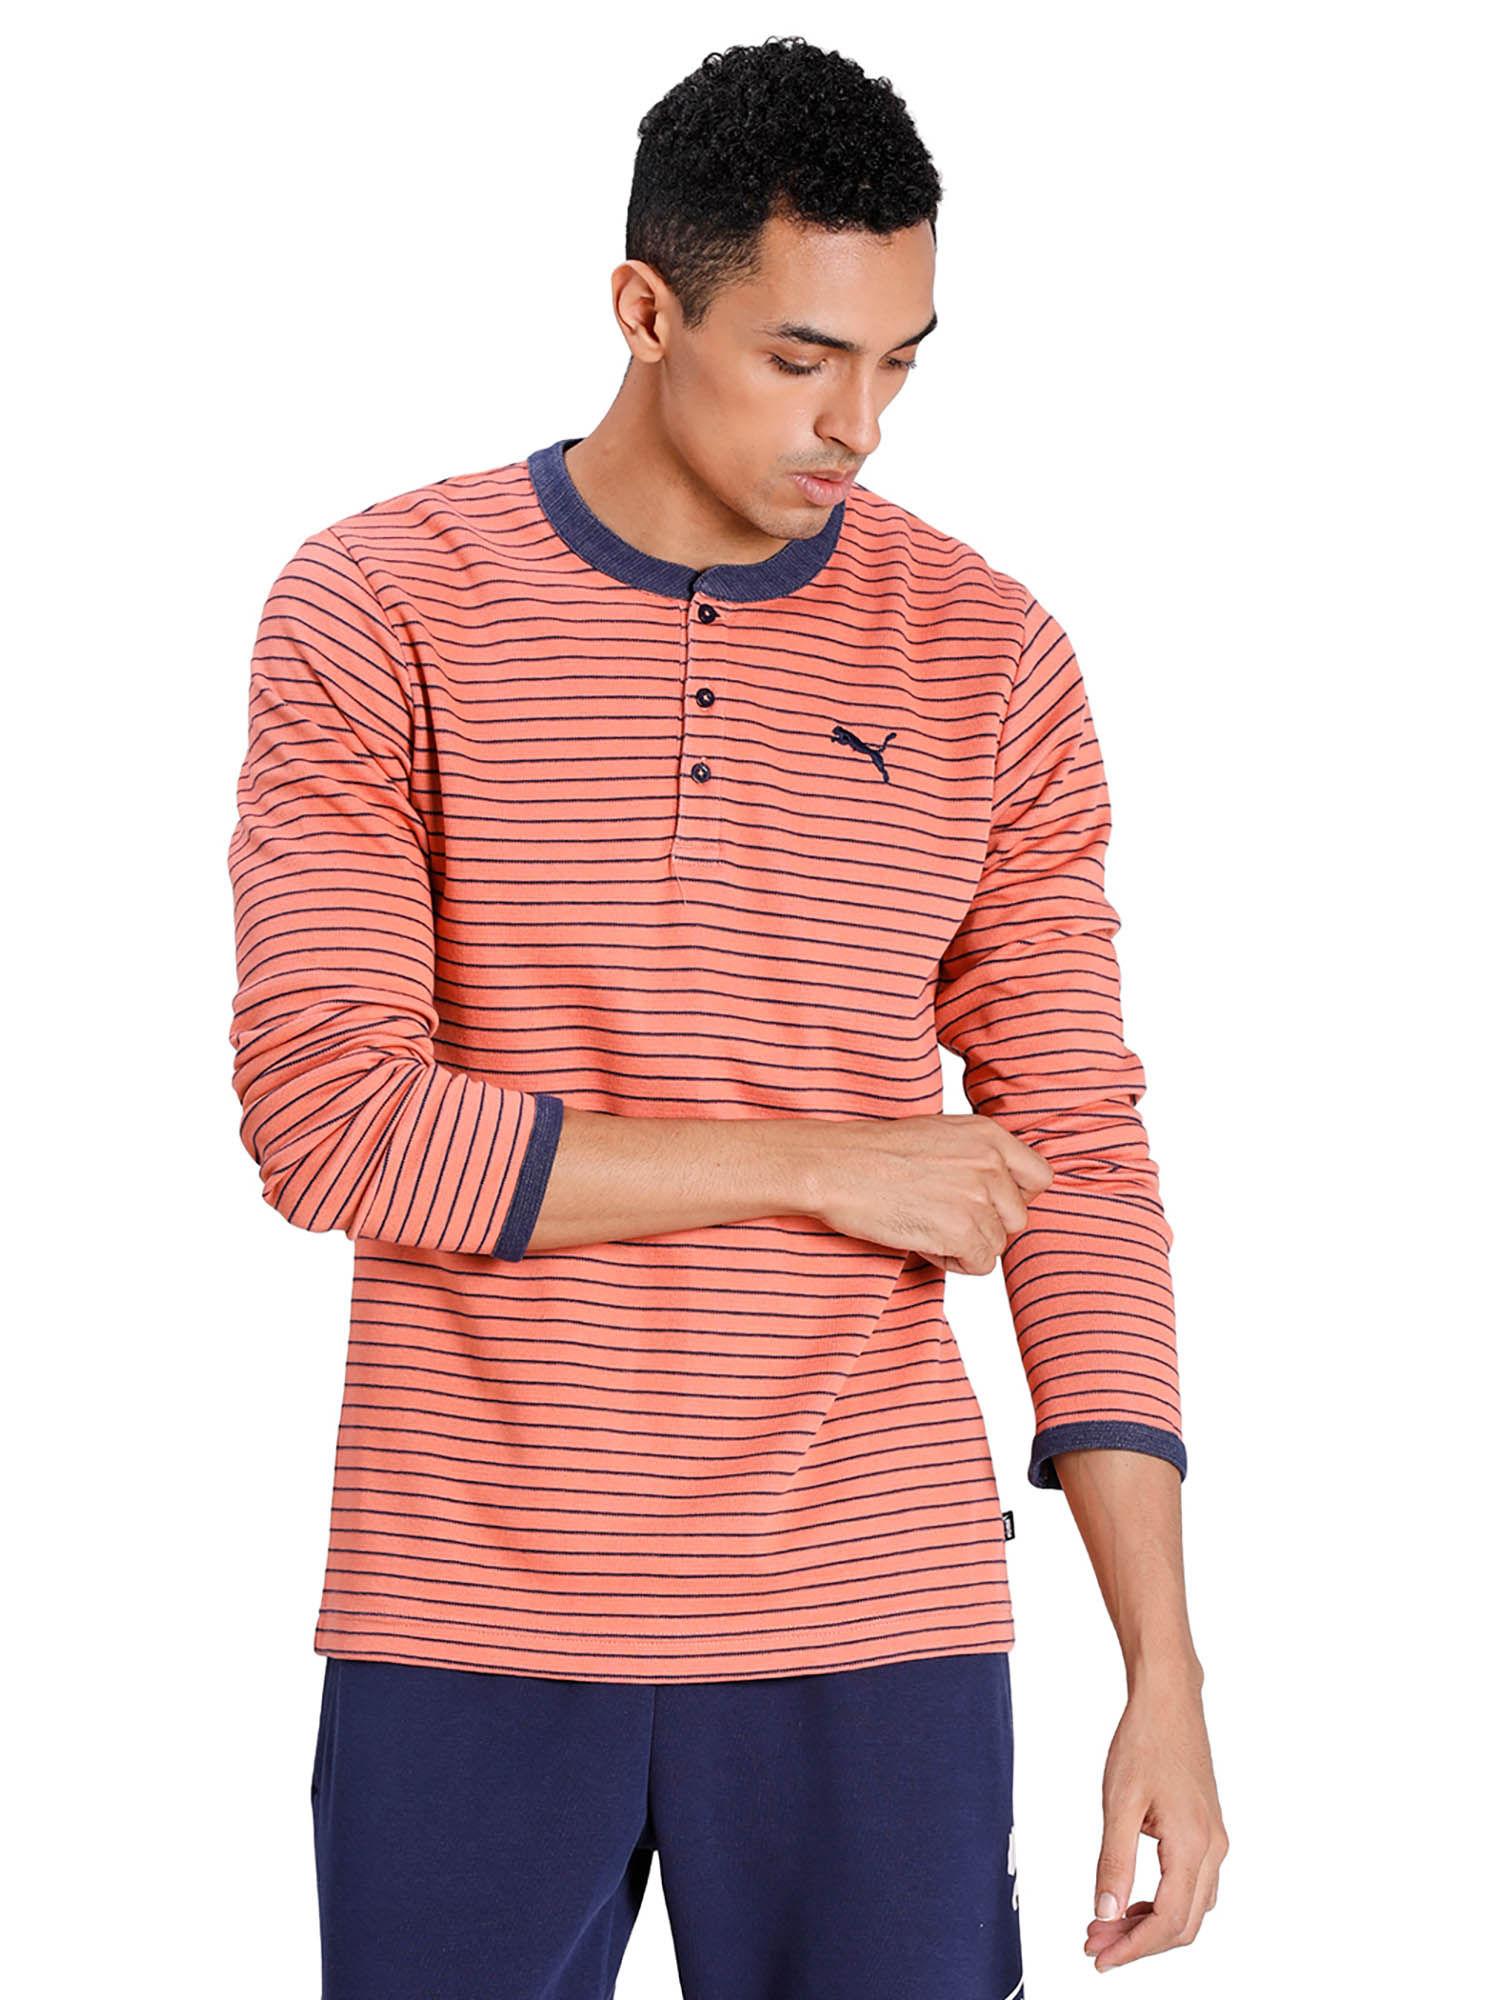 coral stripes sweater